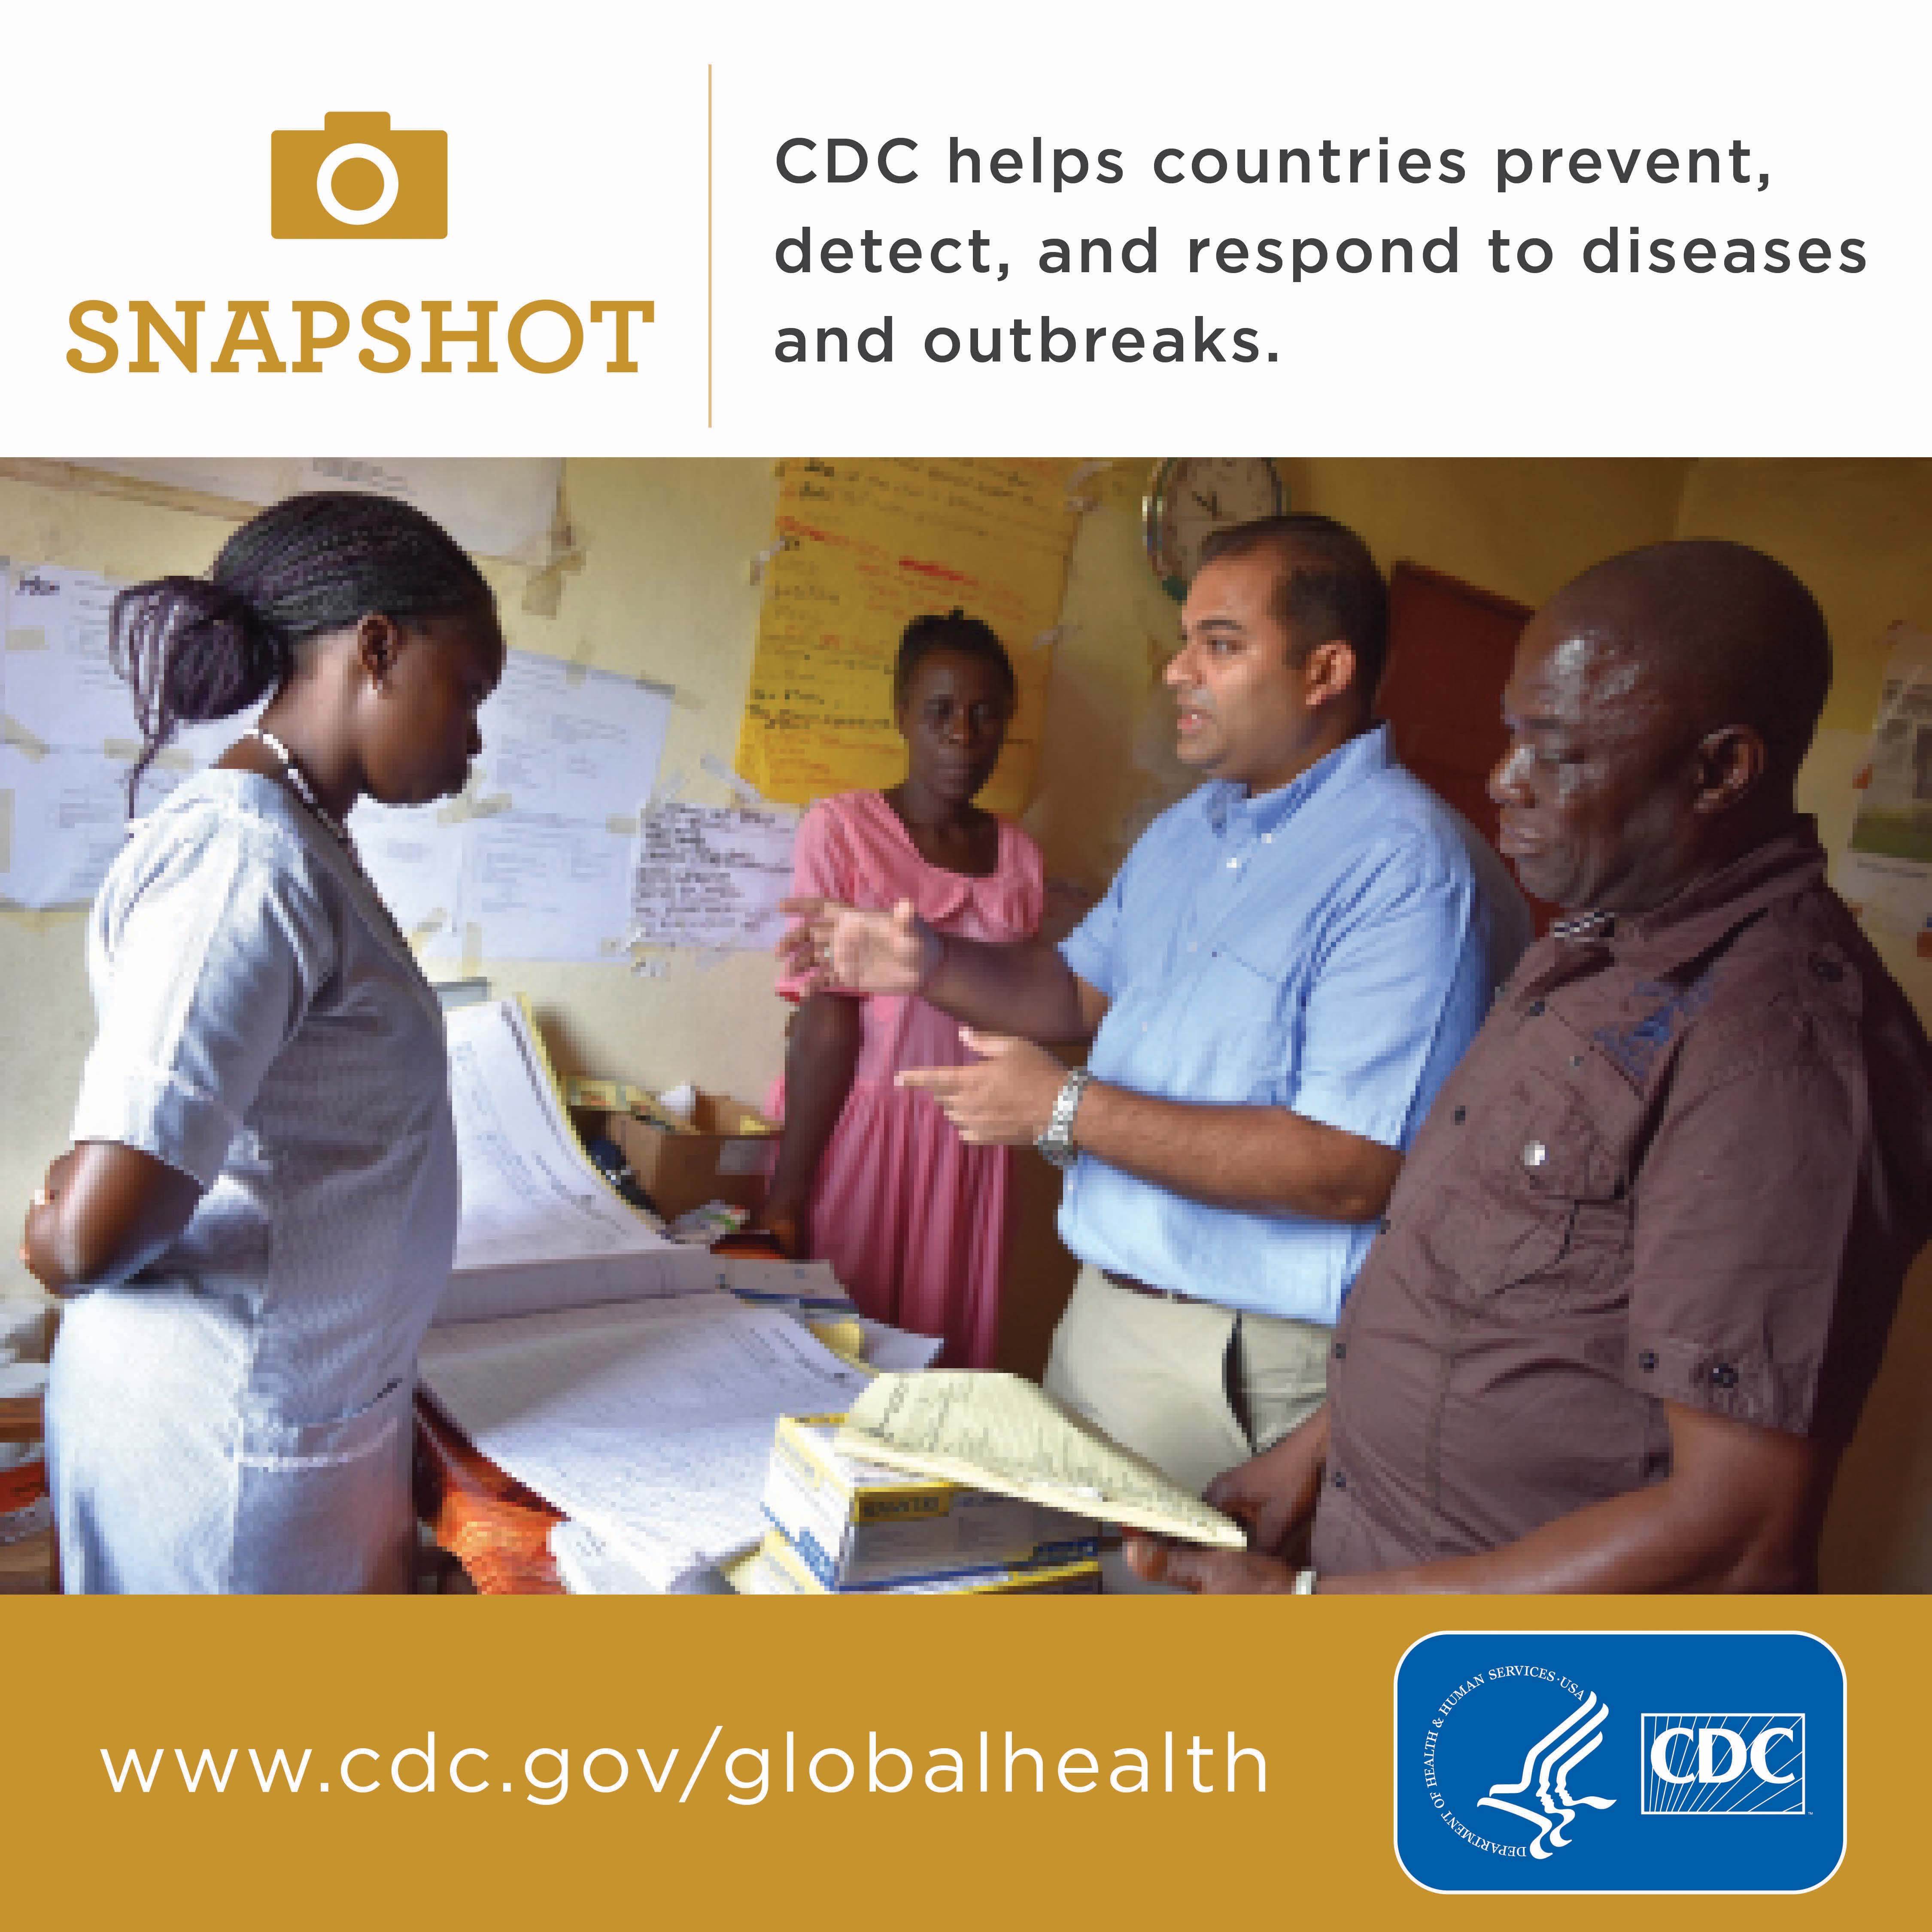 CDC helps countries prevent, detect, and respond to diseases and outbreaks